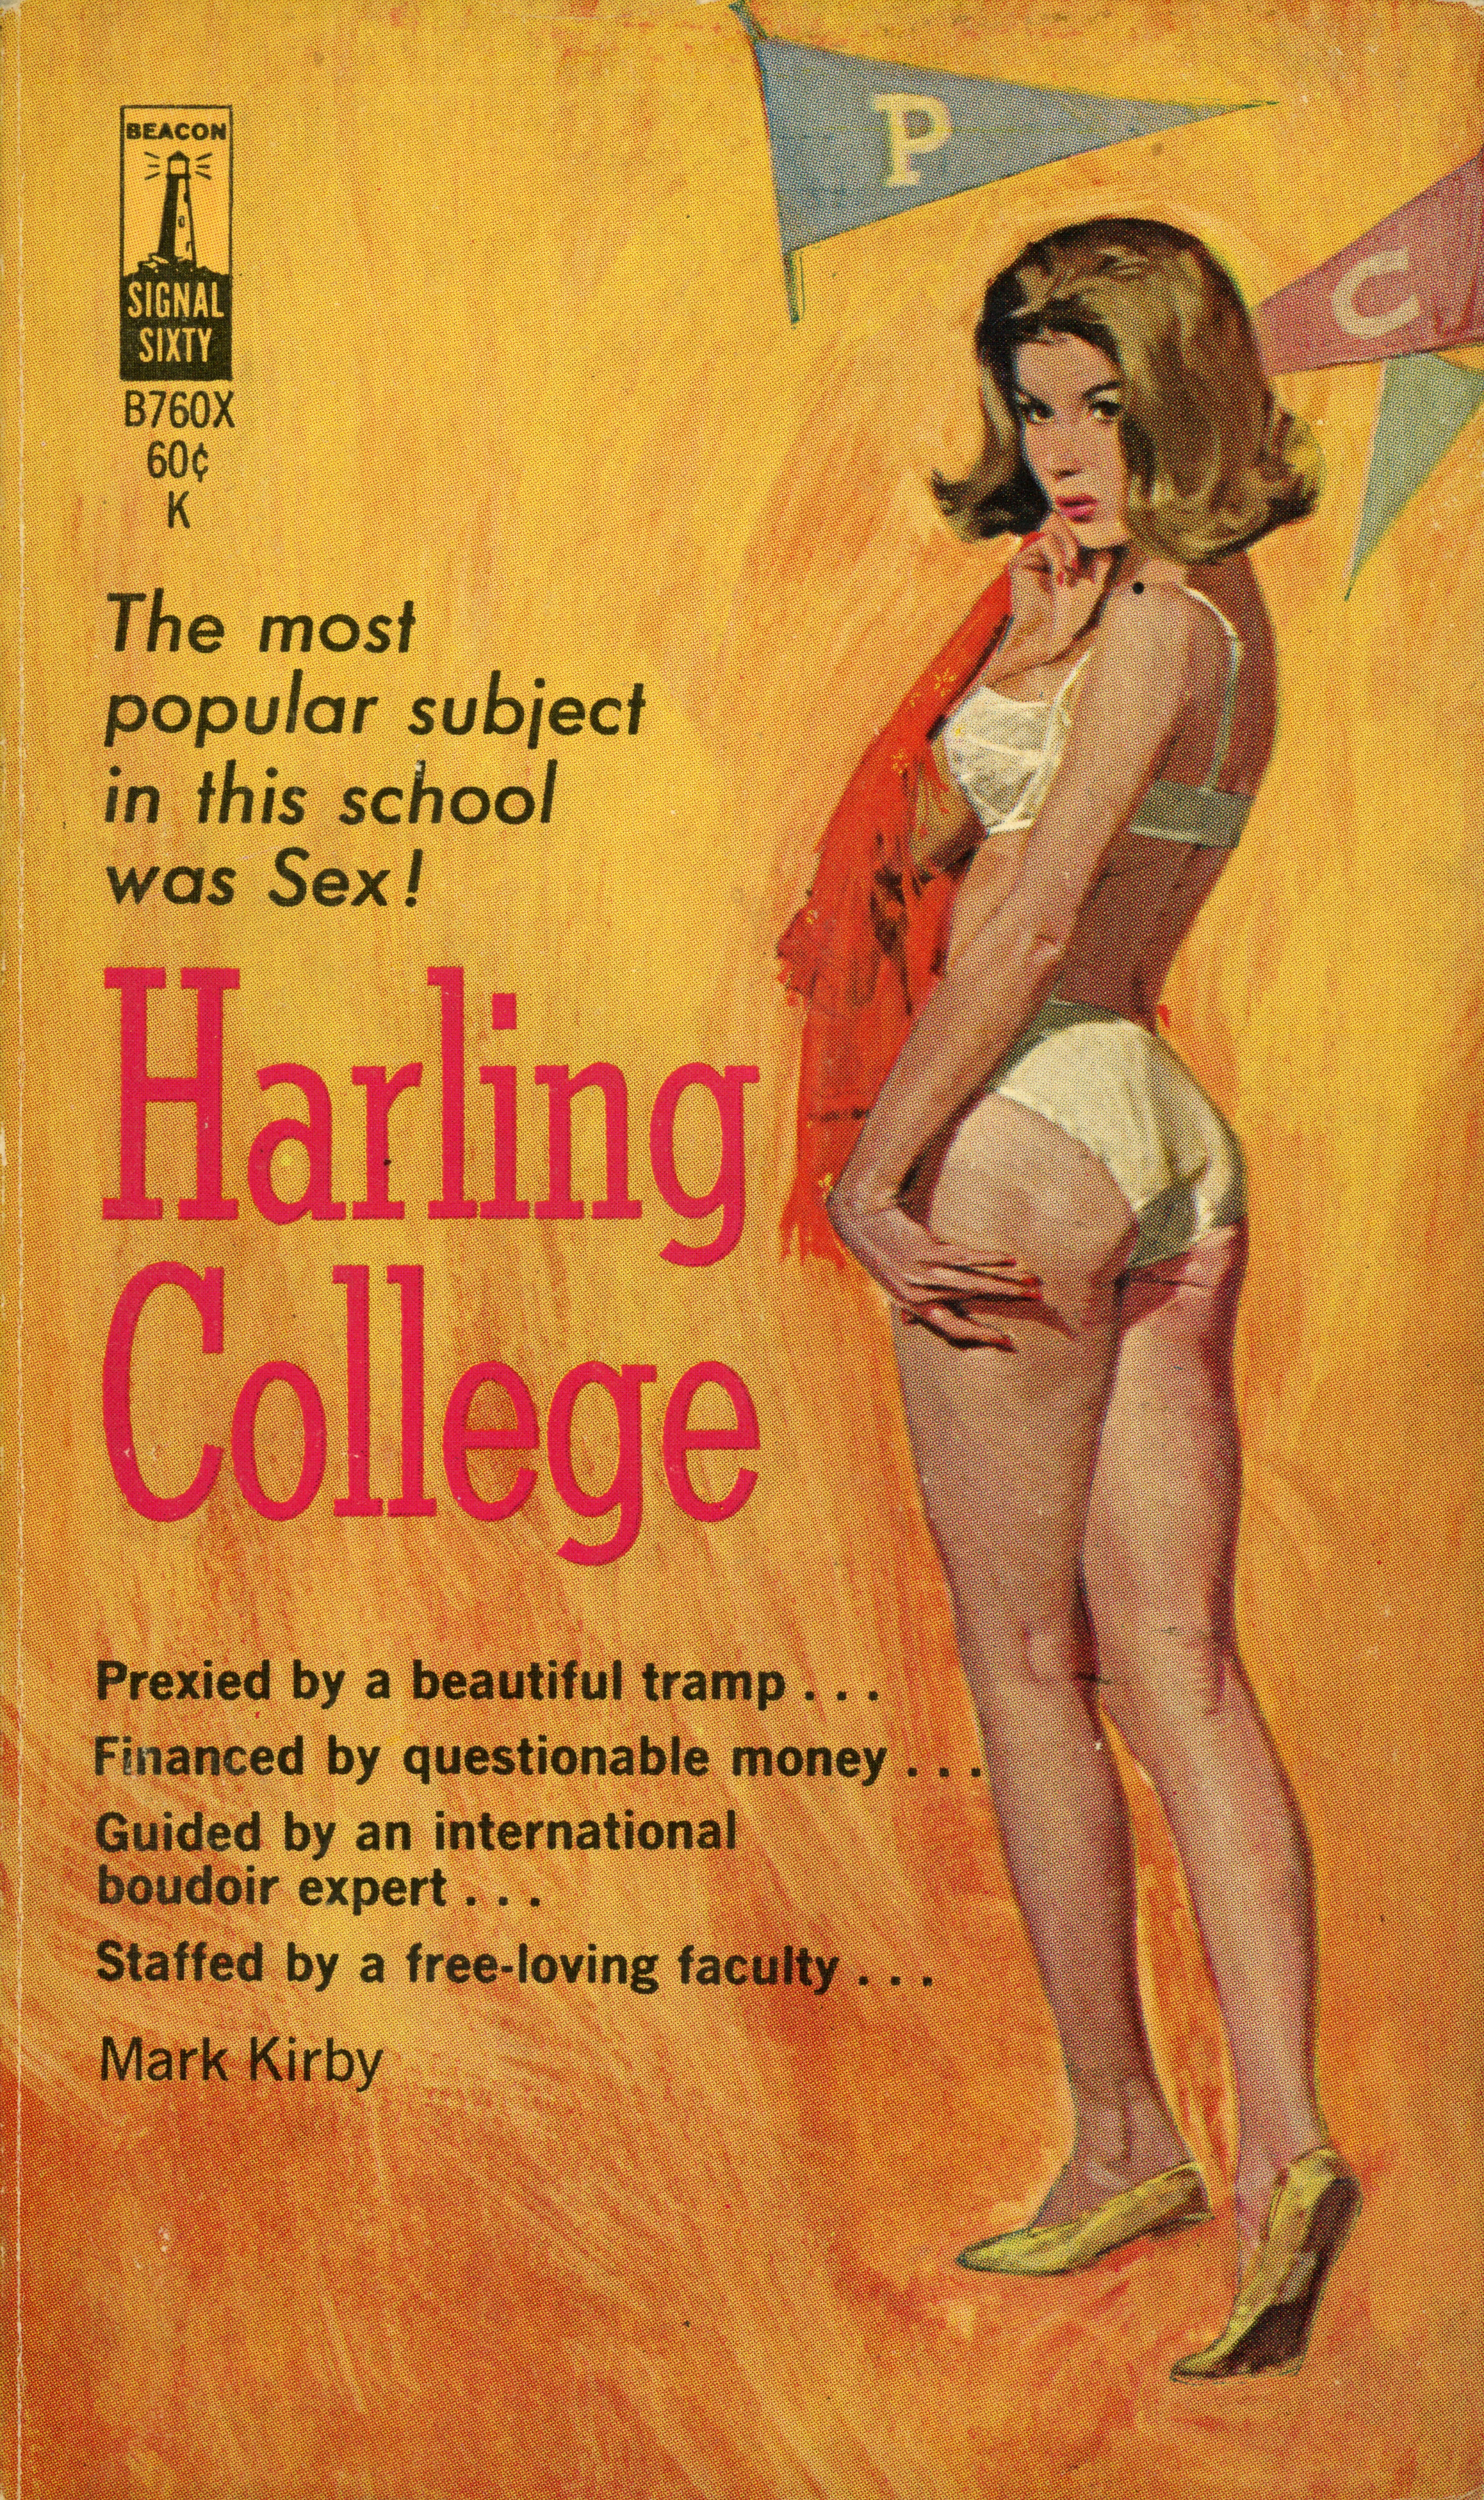 Harling College (1964) -- Pulp Covers photo